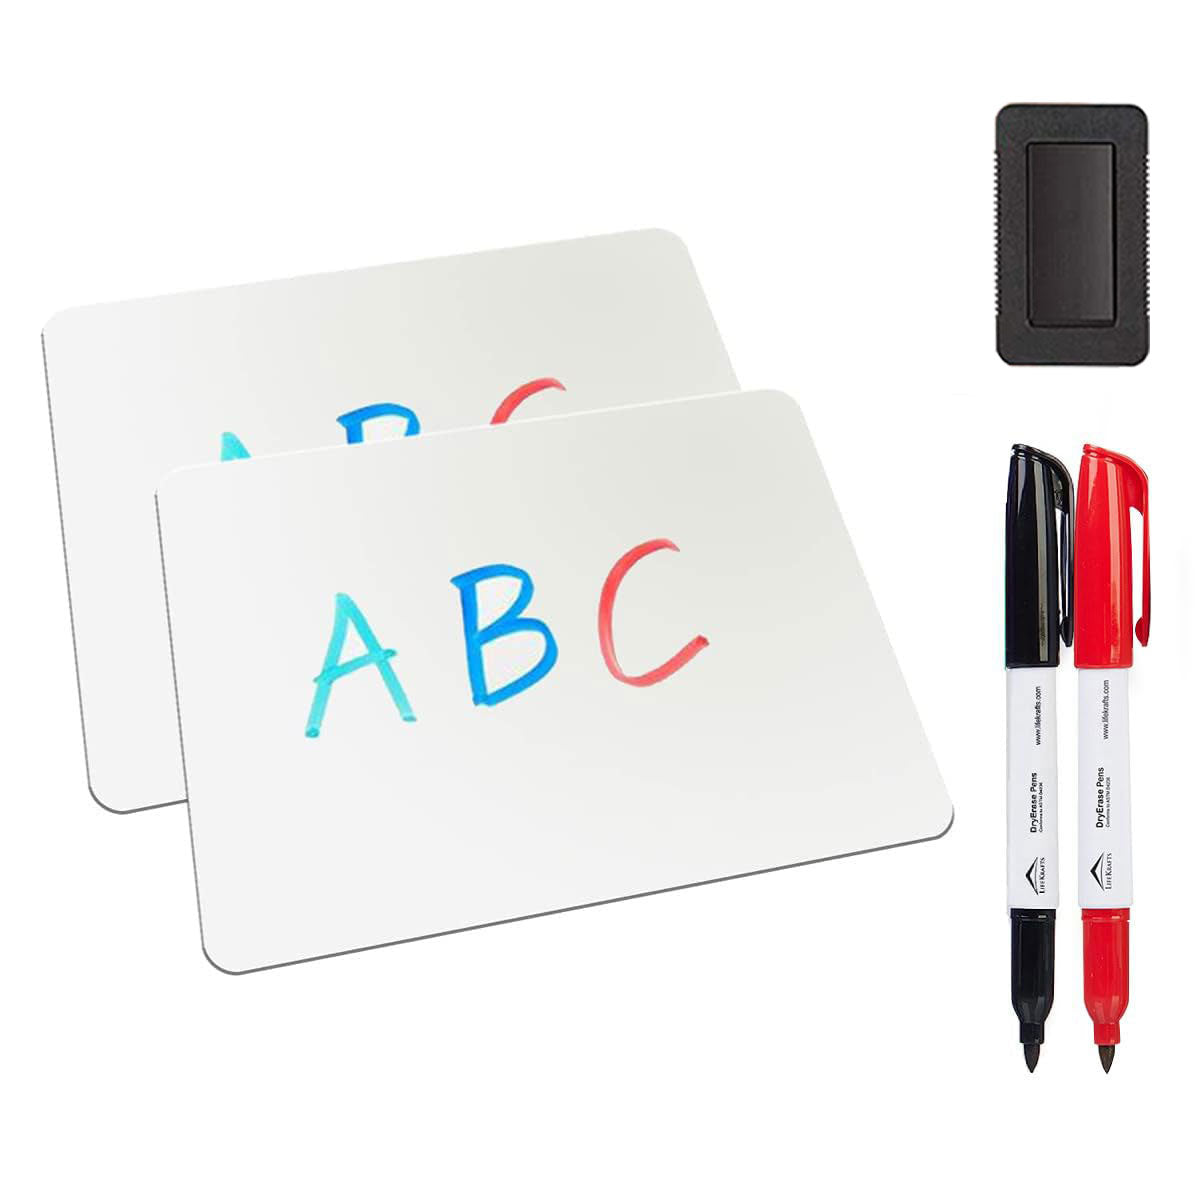 Dry Erase Single sided board, Whiteboard Lapboards - 9 x 12 inches